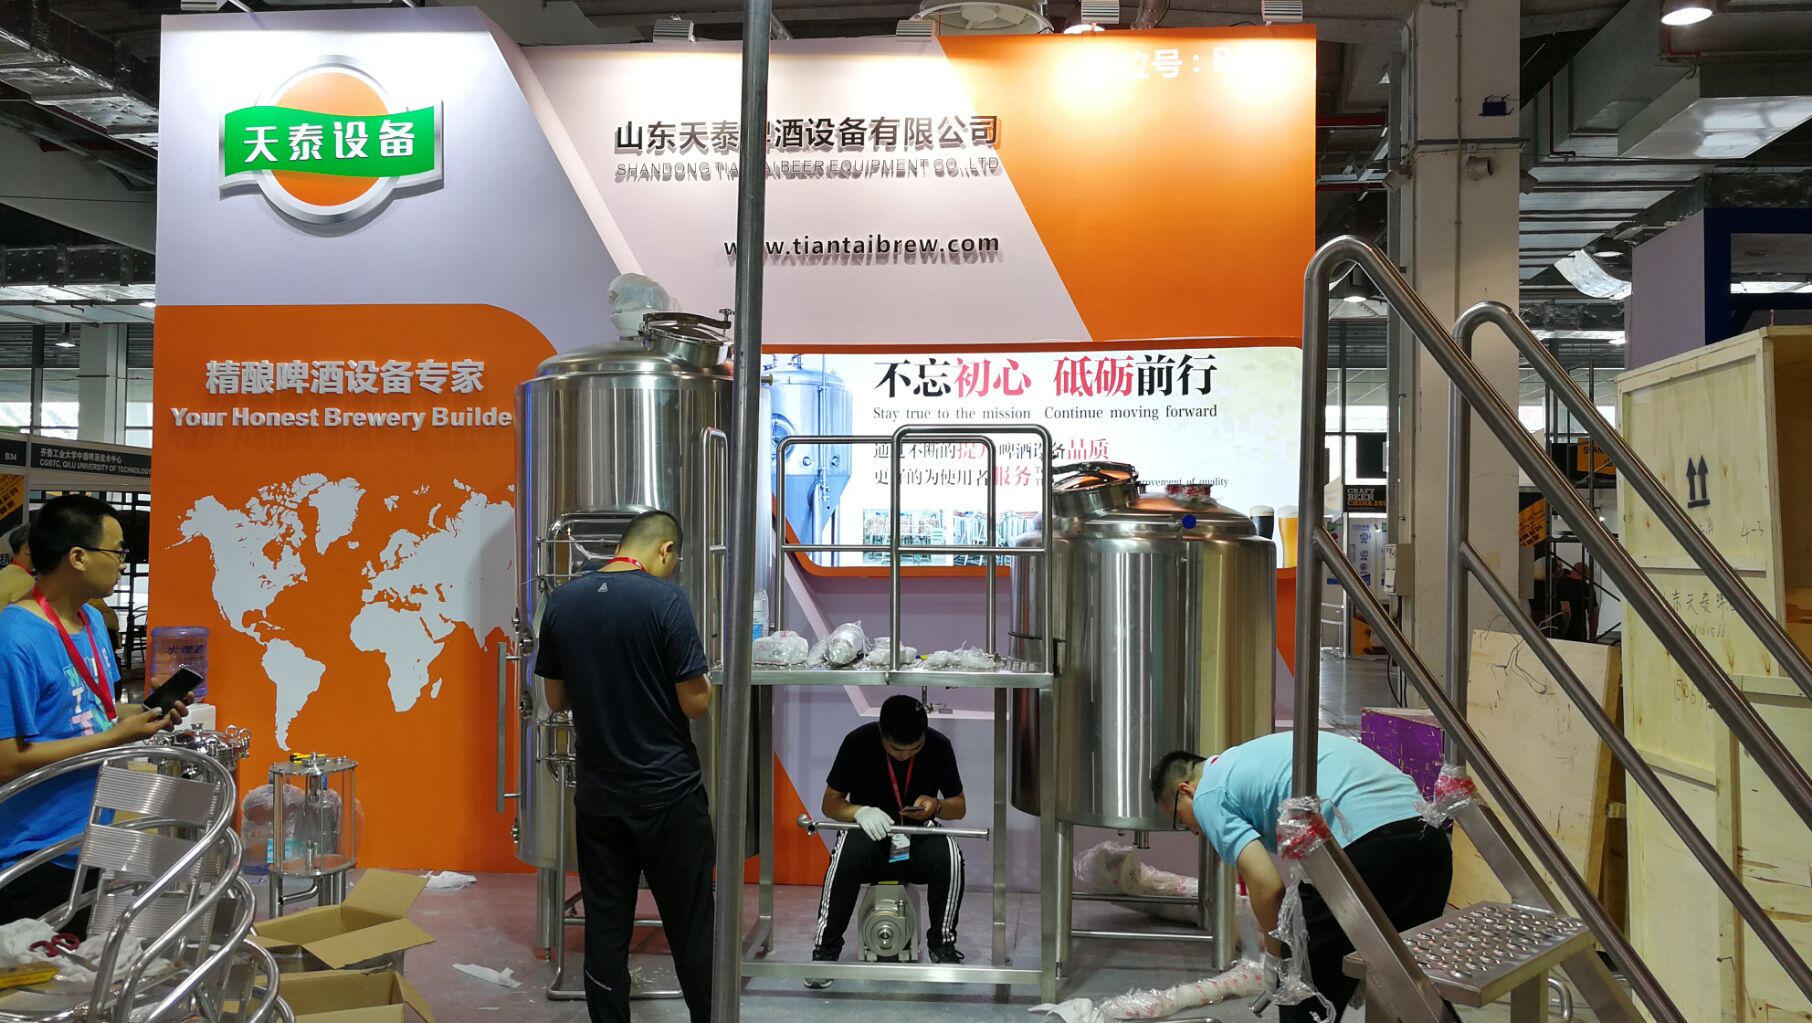 We are at Craft Beer China Conference & Exhibition